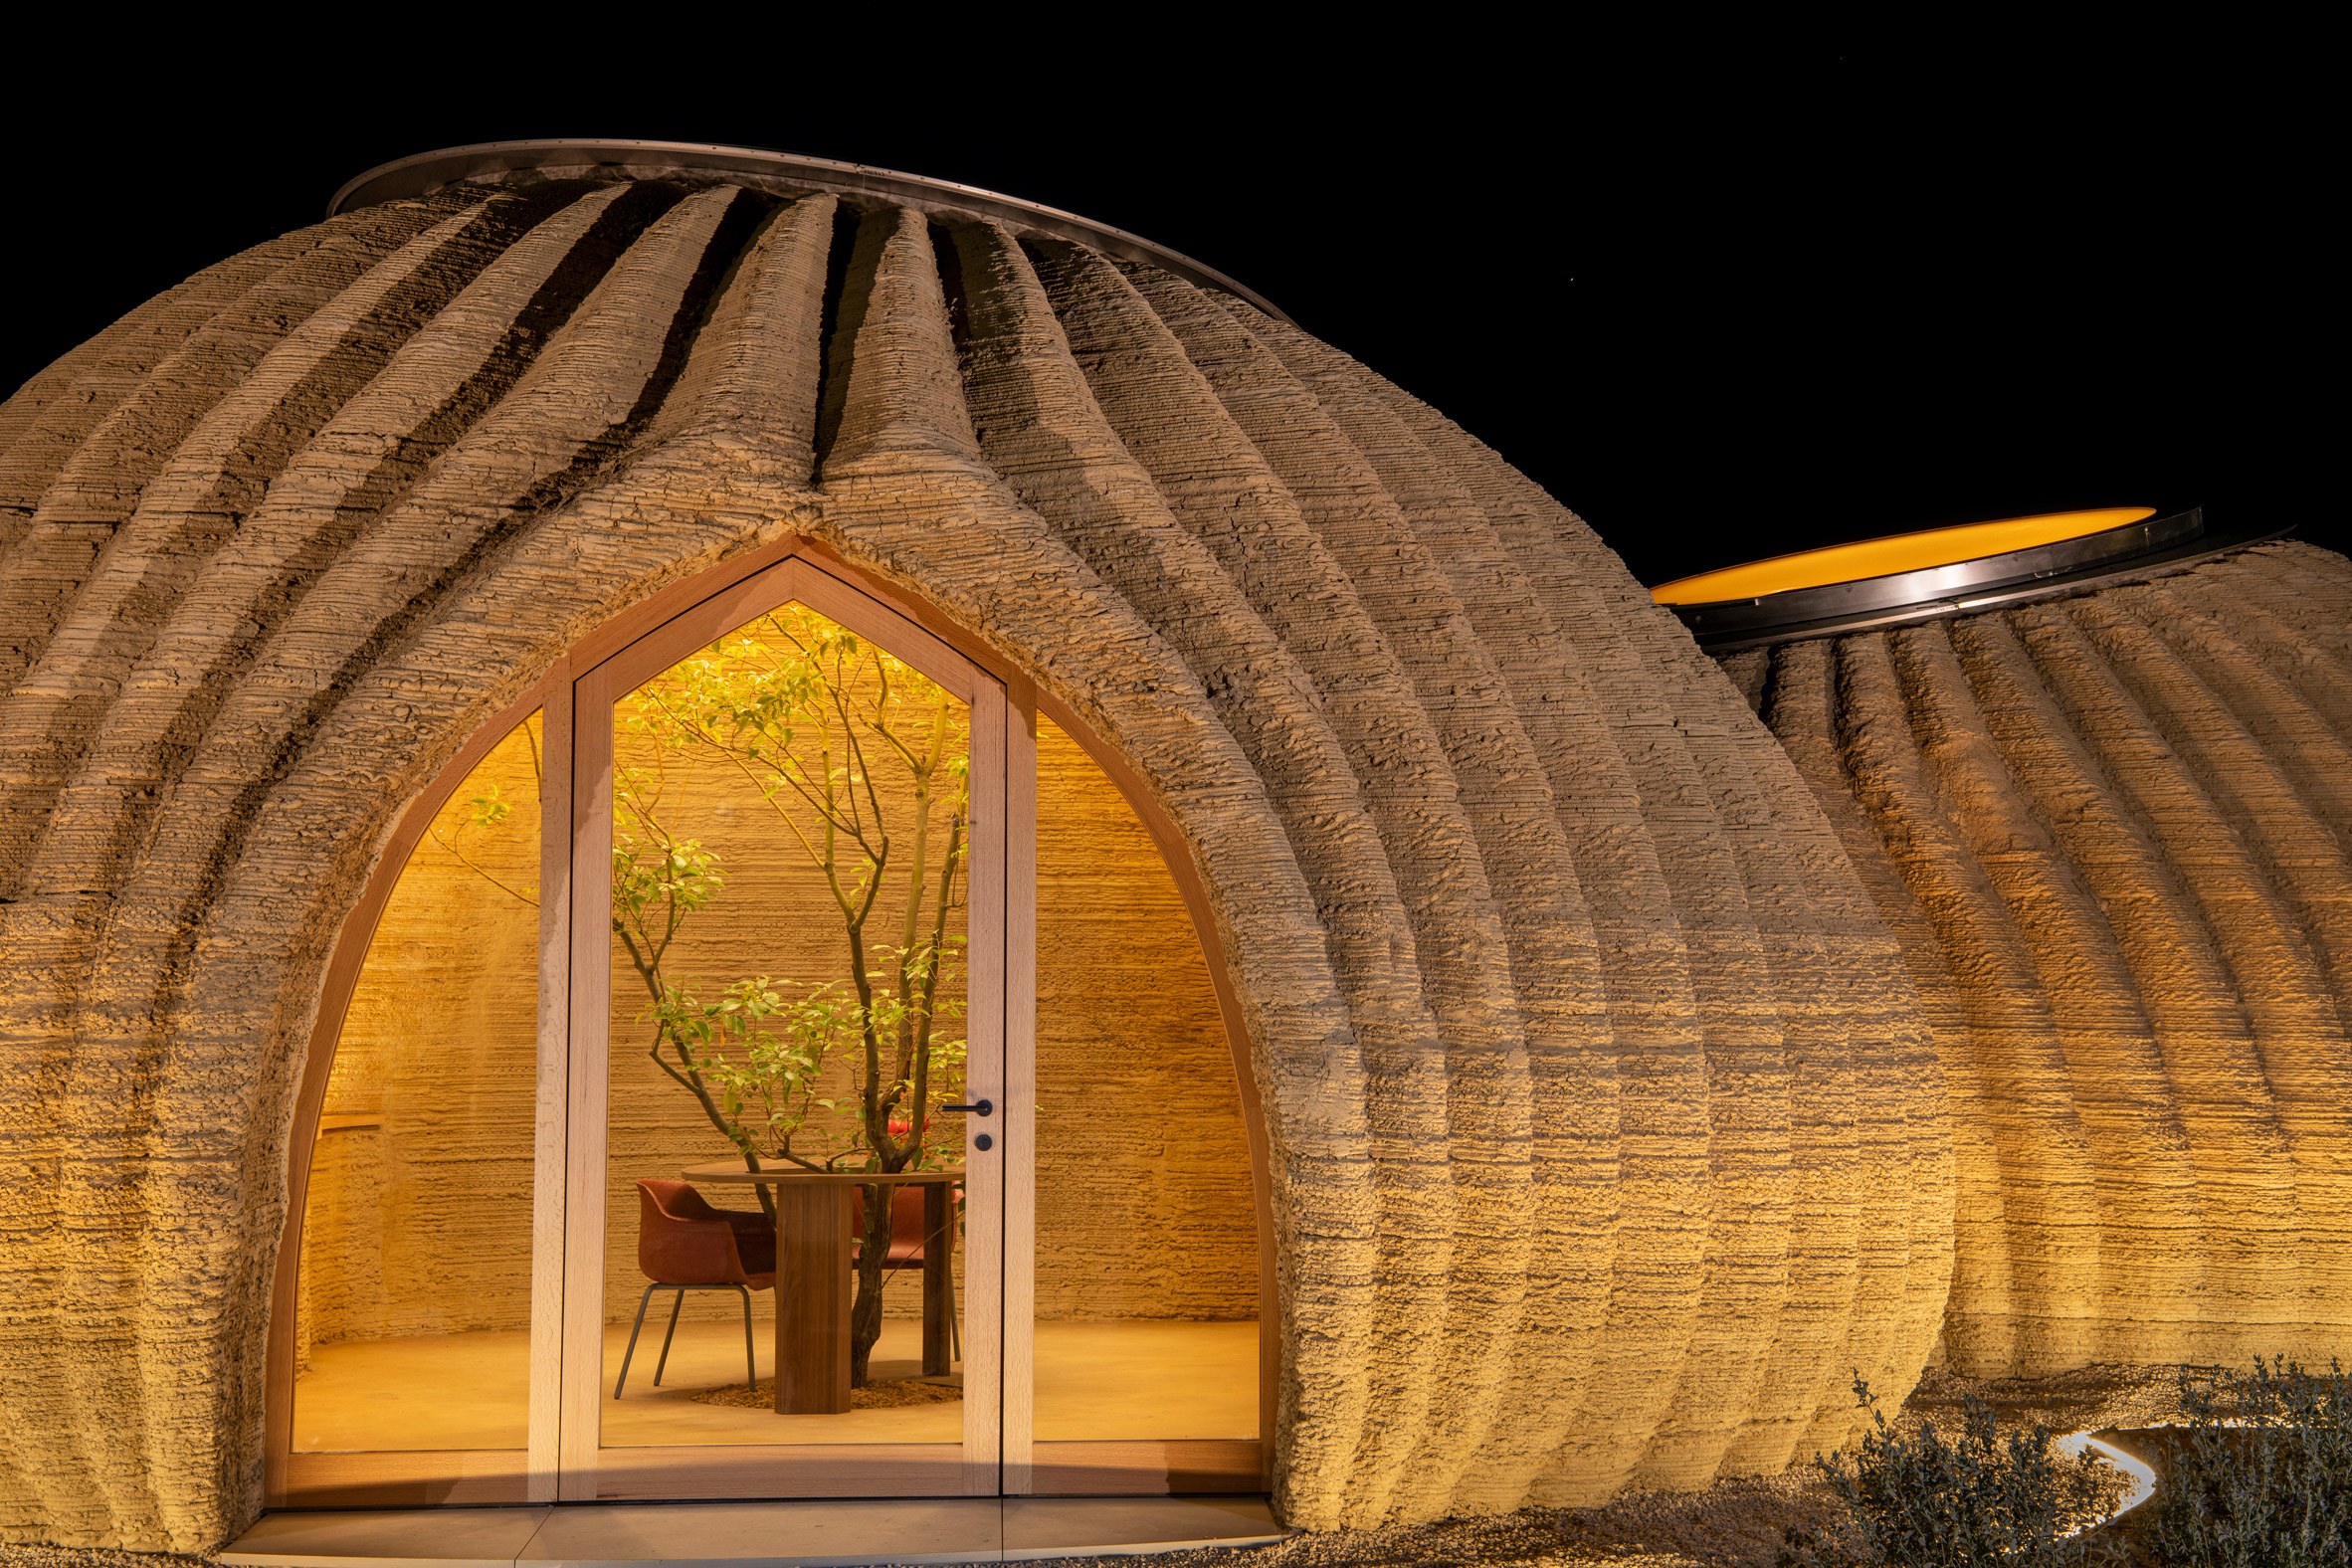 TECLA 3d-printed sustainable home